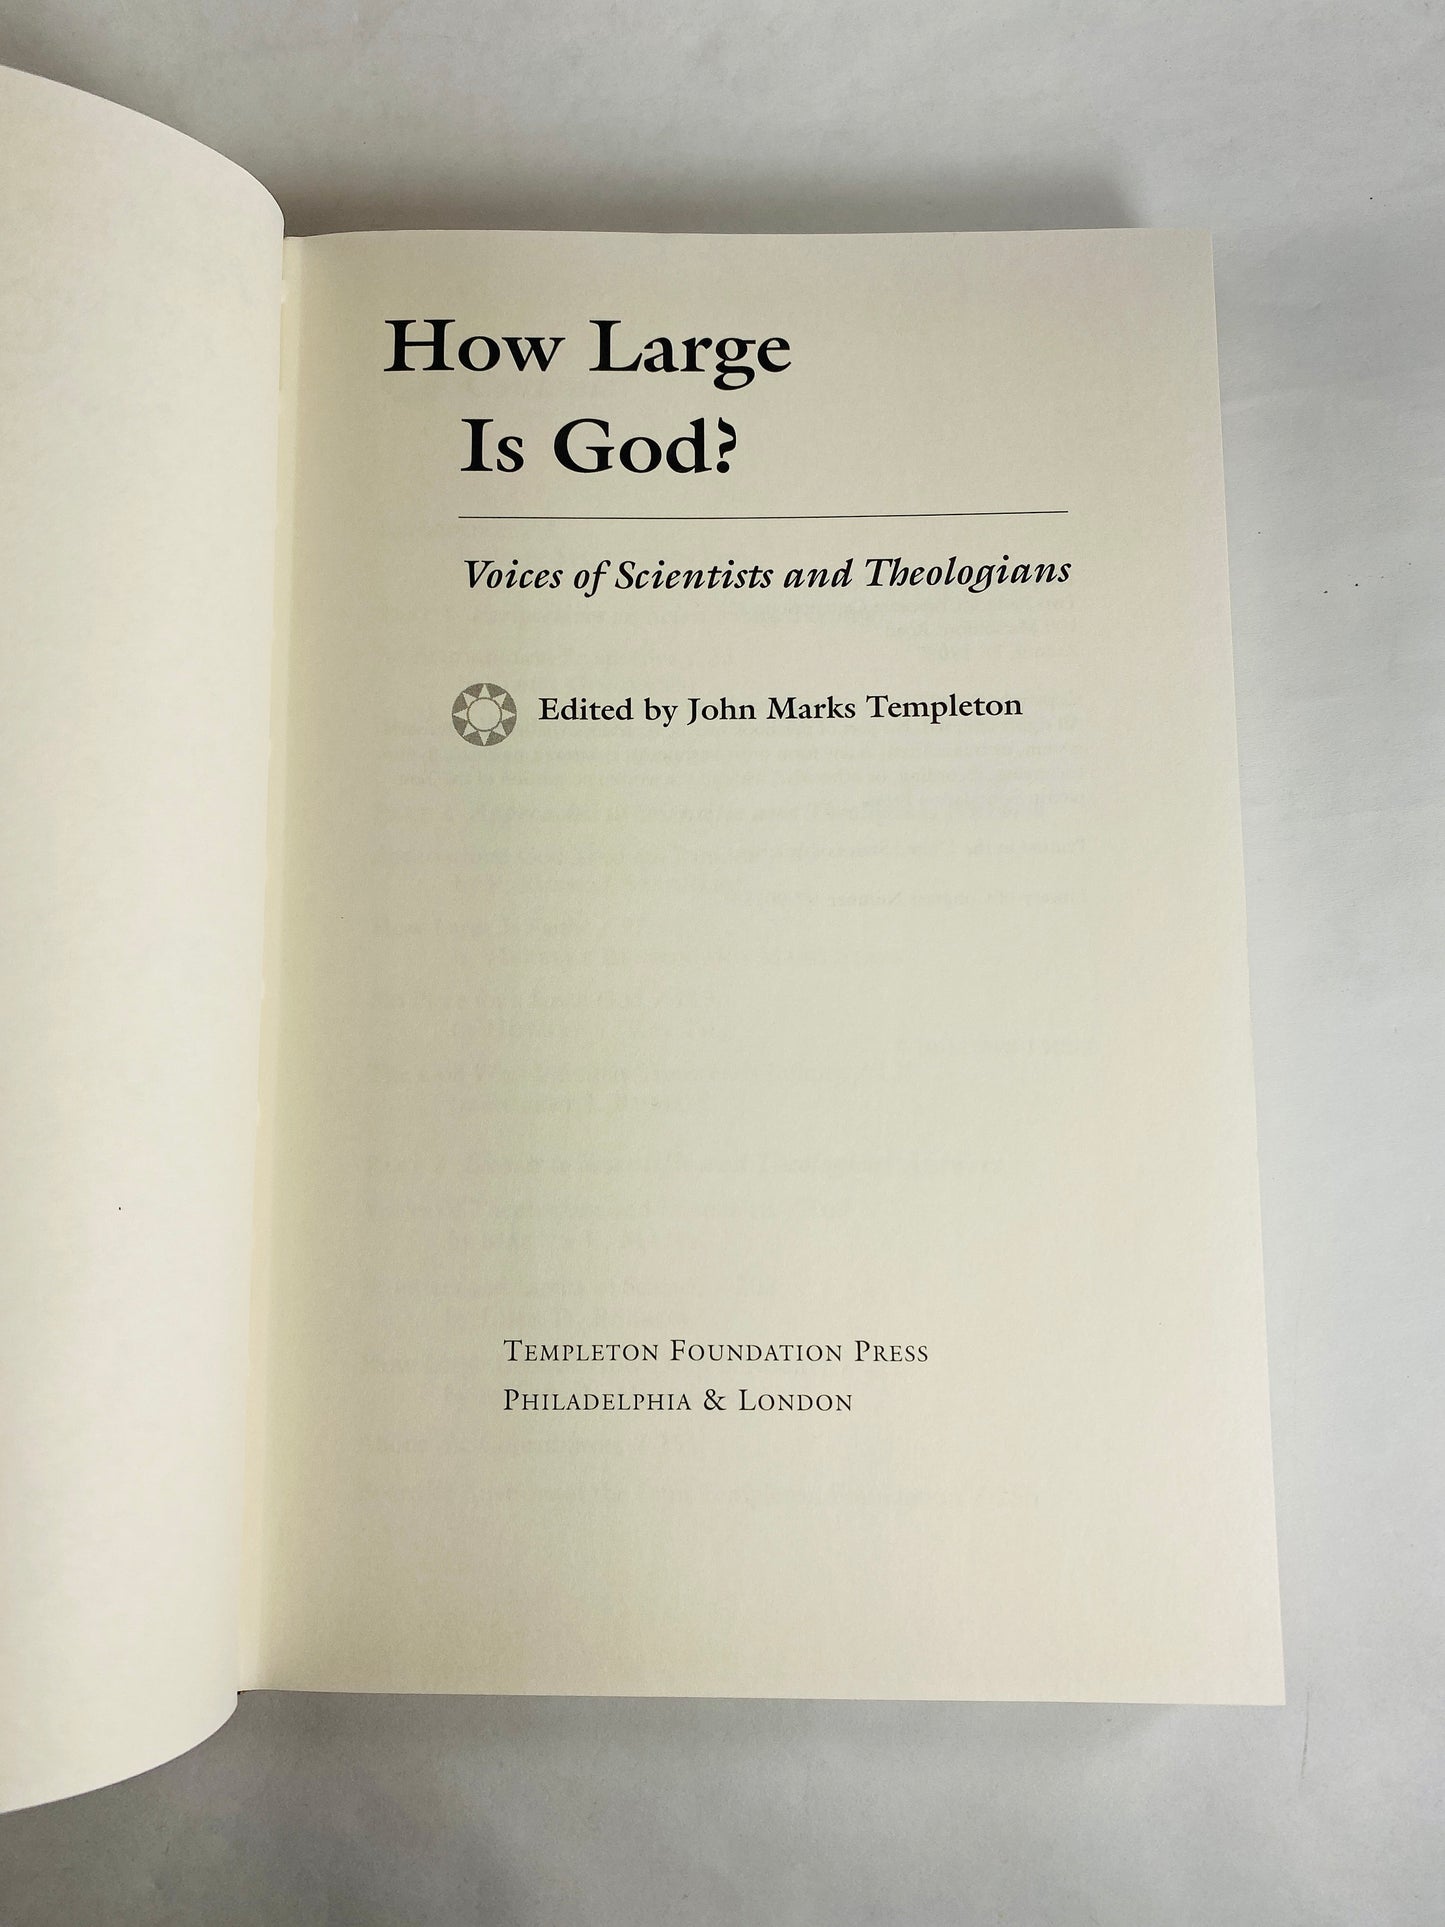 How Large is God vintage book by John Marks Templeton circa 1997 Paradox science theology faith